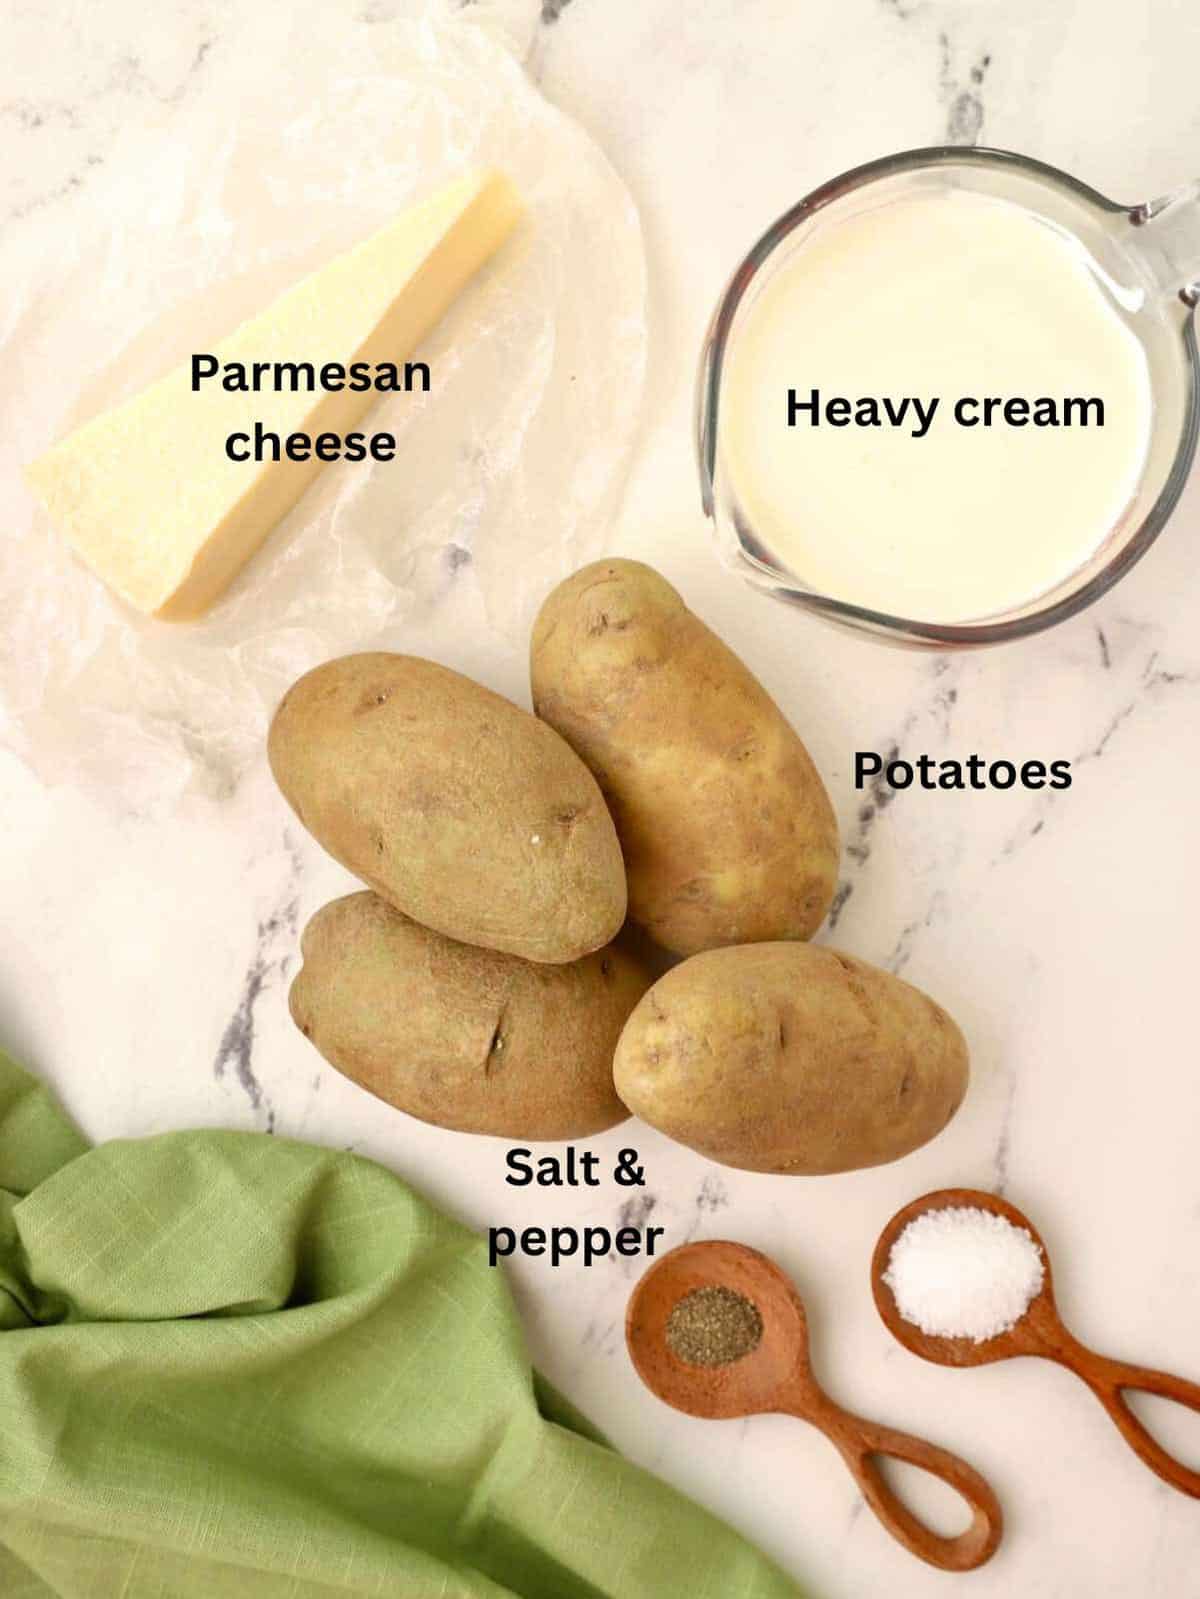 Four potatoes, a measuring cup of heavy cream, and a block of parmesan cheese on a counter. 